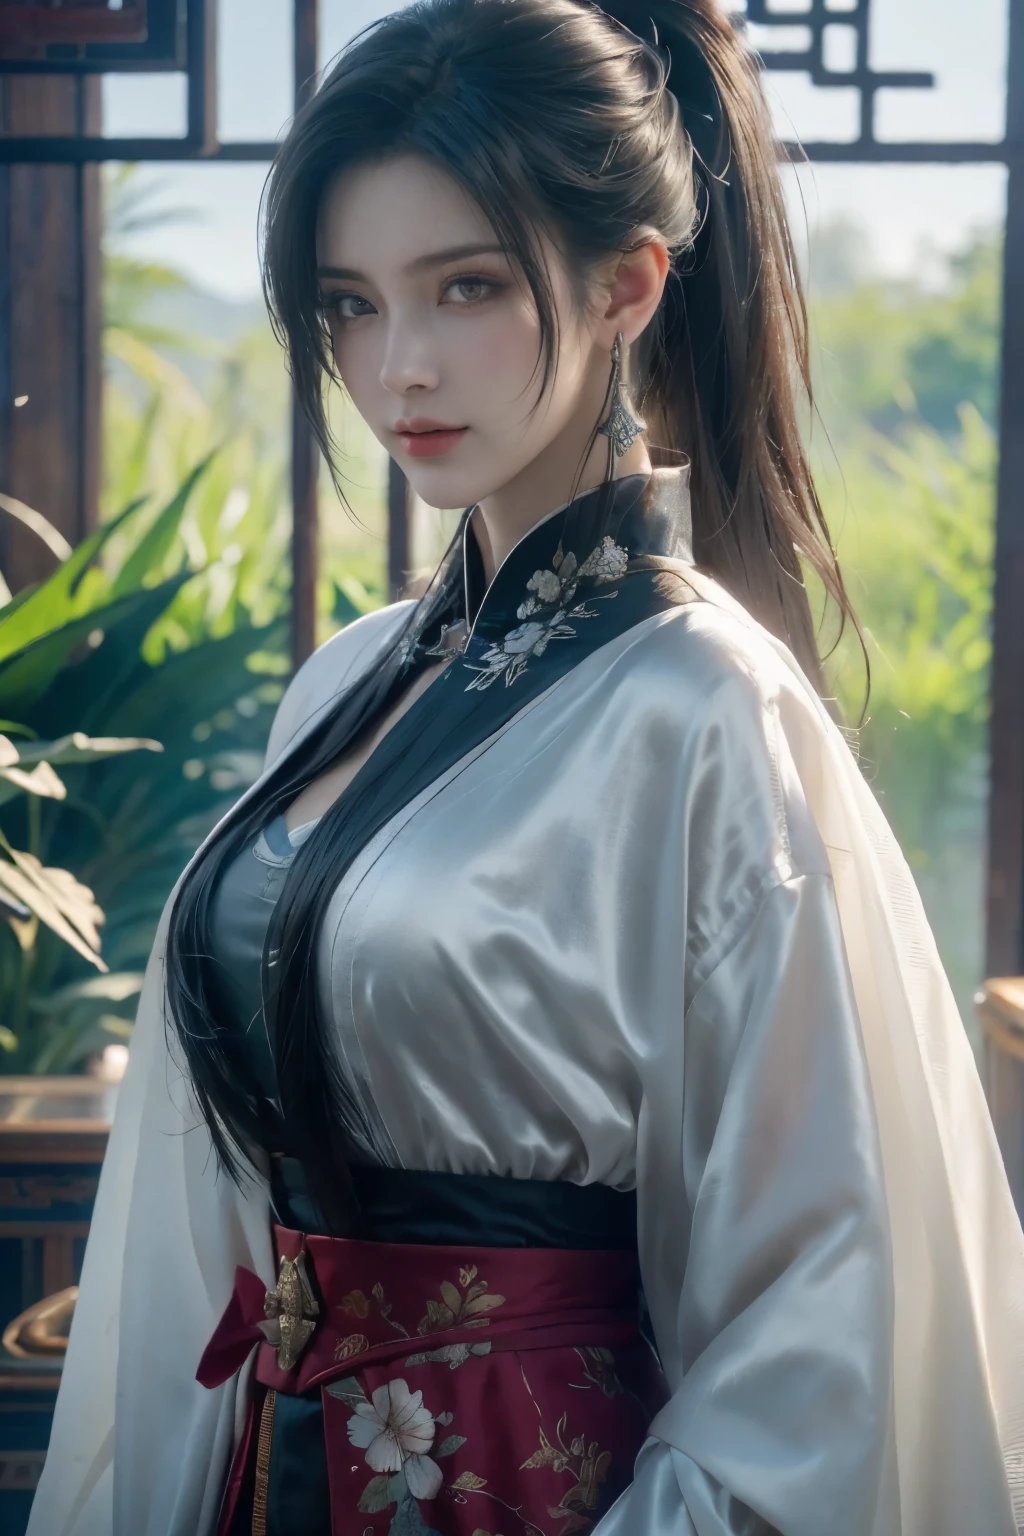 Game art，The best picture quality，Highest resolution，8K，((A bust photograph))，((Portrait))，((Head close-up))，(Rule of thirds)，Unreal Engine 5 rendering works， (The Girl of the Future)，(Female Warrior)， 22-year-old girl，(Ancient Chinese women)，(Rainbow hair，Ancient Oriental hairstyle)，((The pupils of the red eyes:1.3))，(A beautiful eye full of detail)，(Big breasts)，(Eye shadow)，Elegant and charming，indifferent，((Anger))，(A silk coat with ancient Chinese style，Bellyband，The clothes are decorated with patterns with Chinese characteristics，A flash of jewellery，White)，(The clothes are made of silk:1.5)，figure，Fantasy style， Photo poses，City background，Movie lights，Ray tracing，Game CG，((3D Unreal Engine))，oc rendering reflection pattern